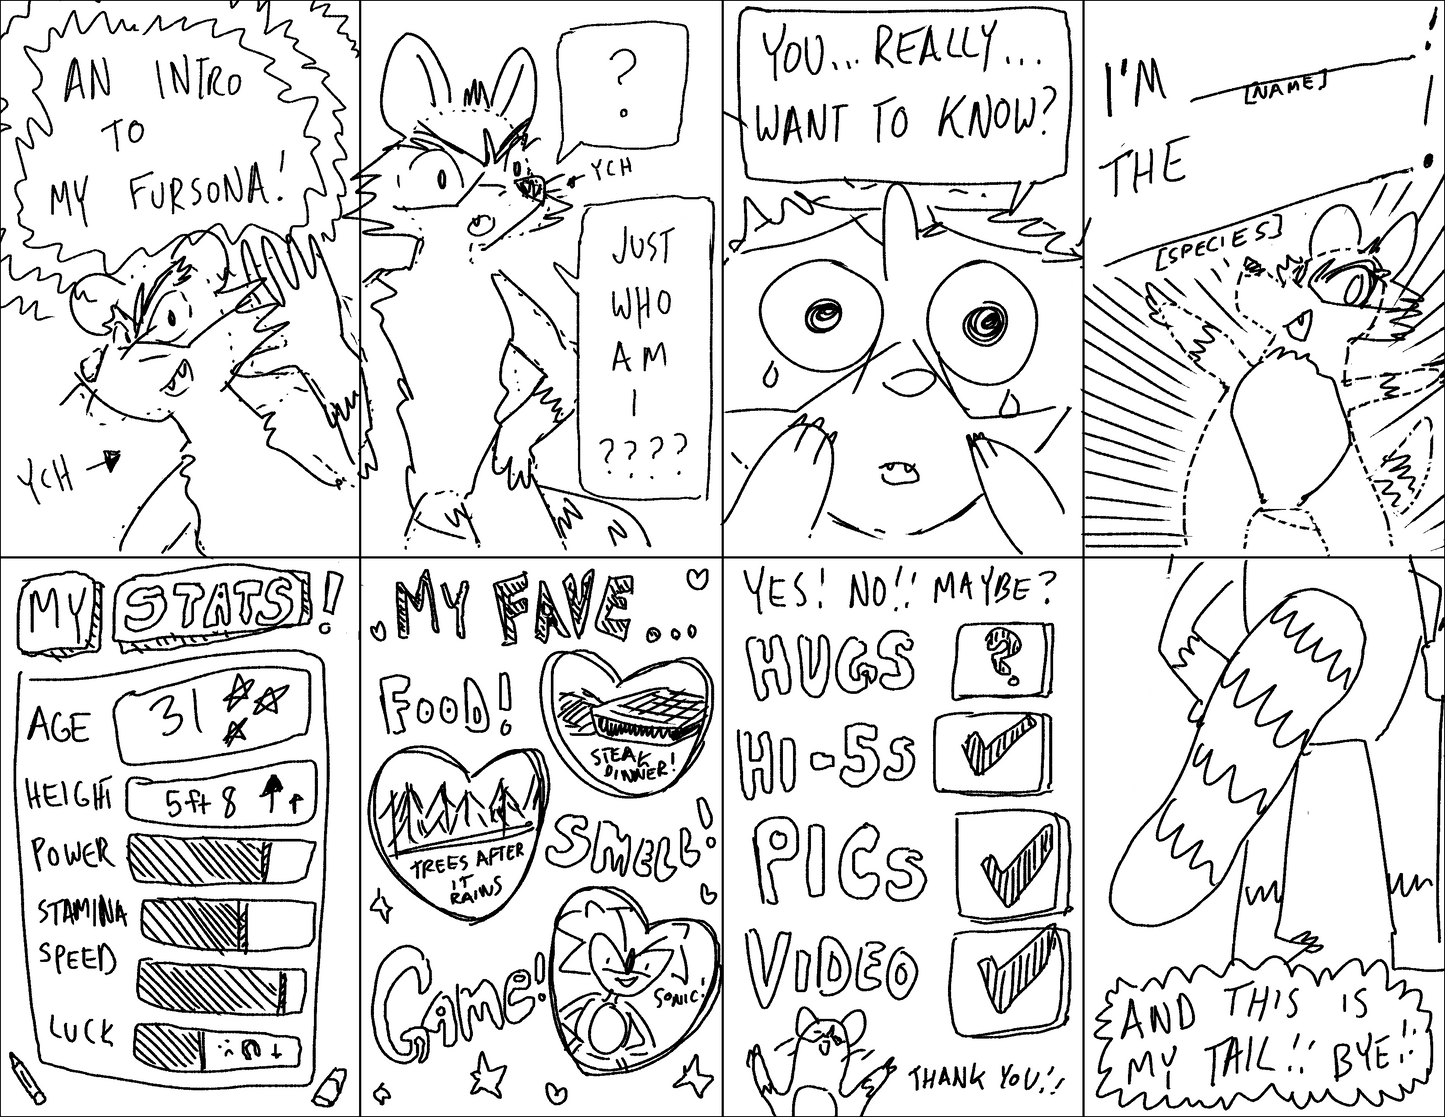 an intro to my fursona zine template - image download